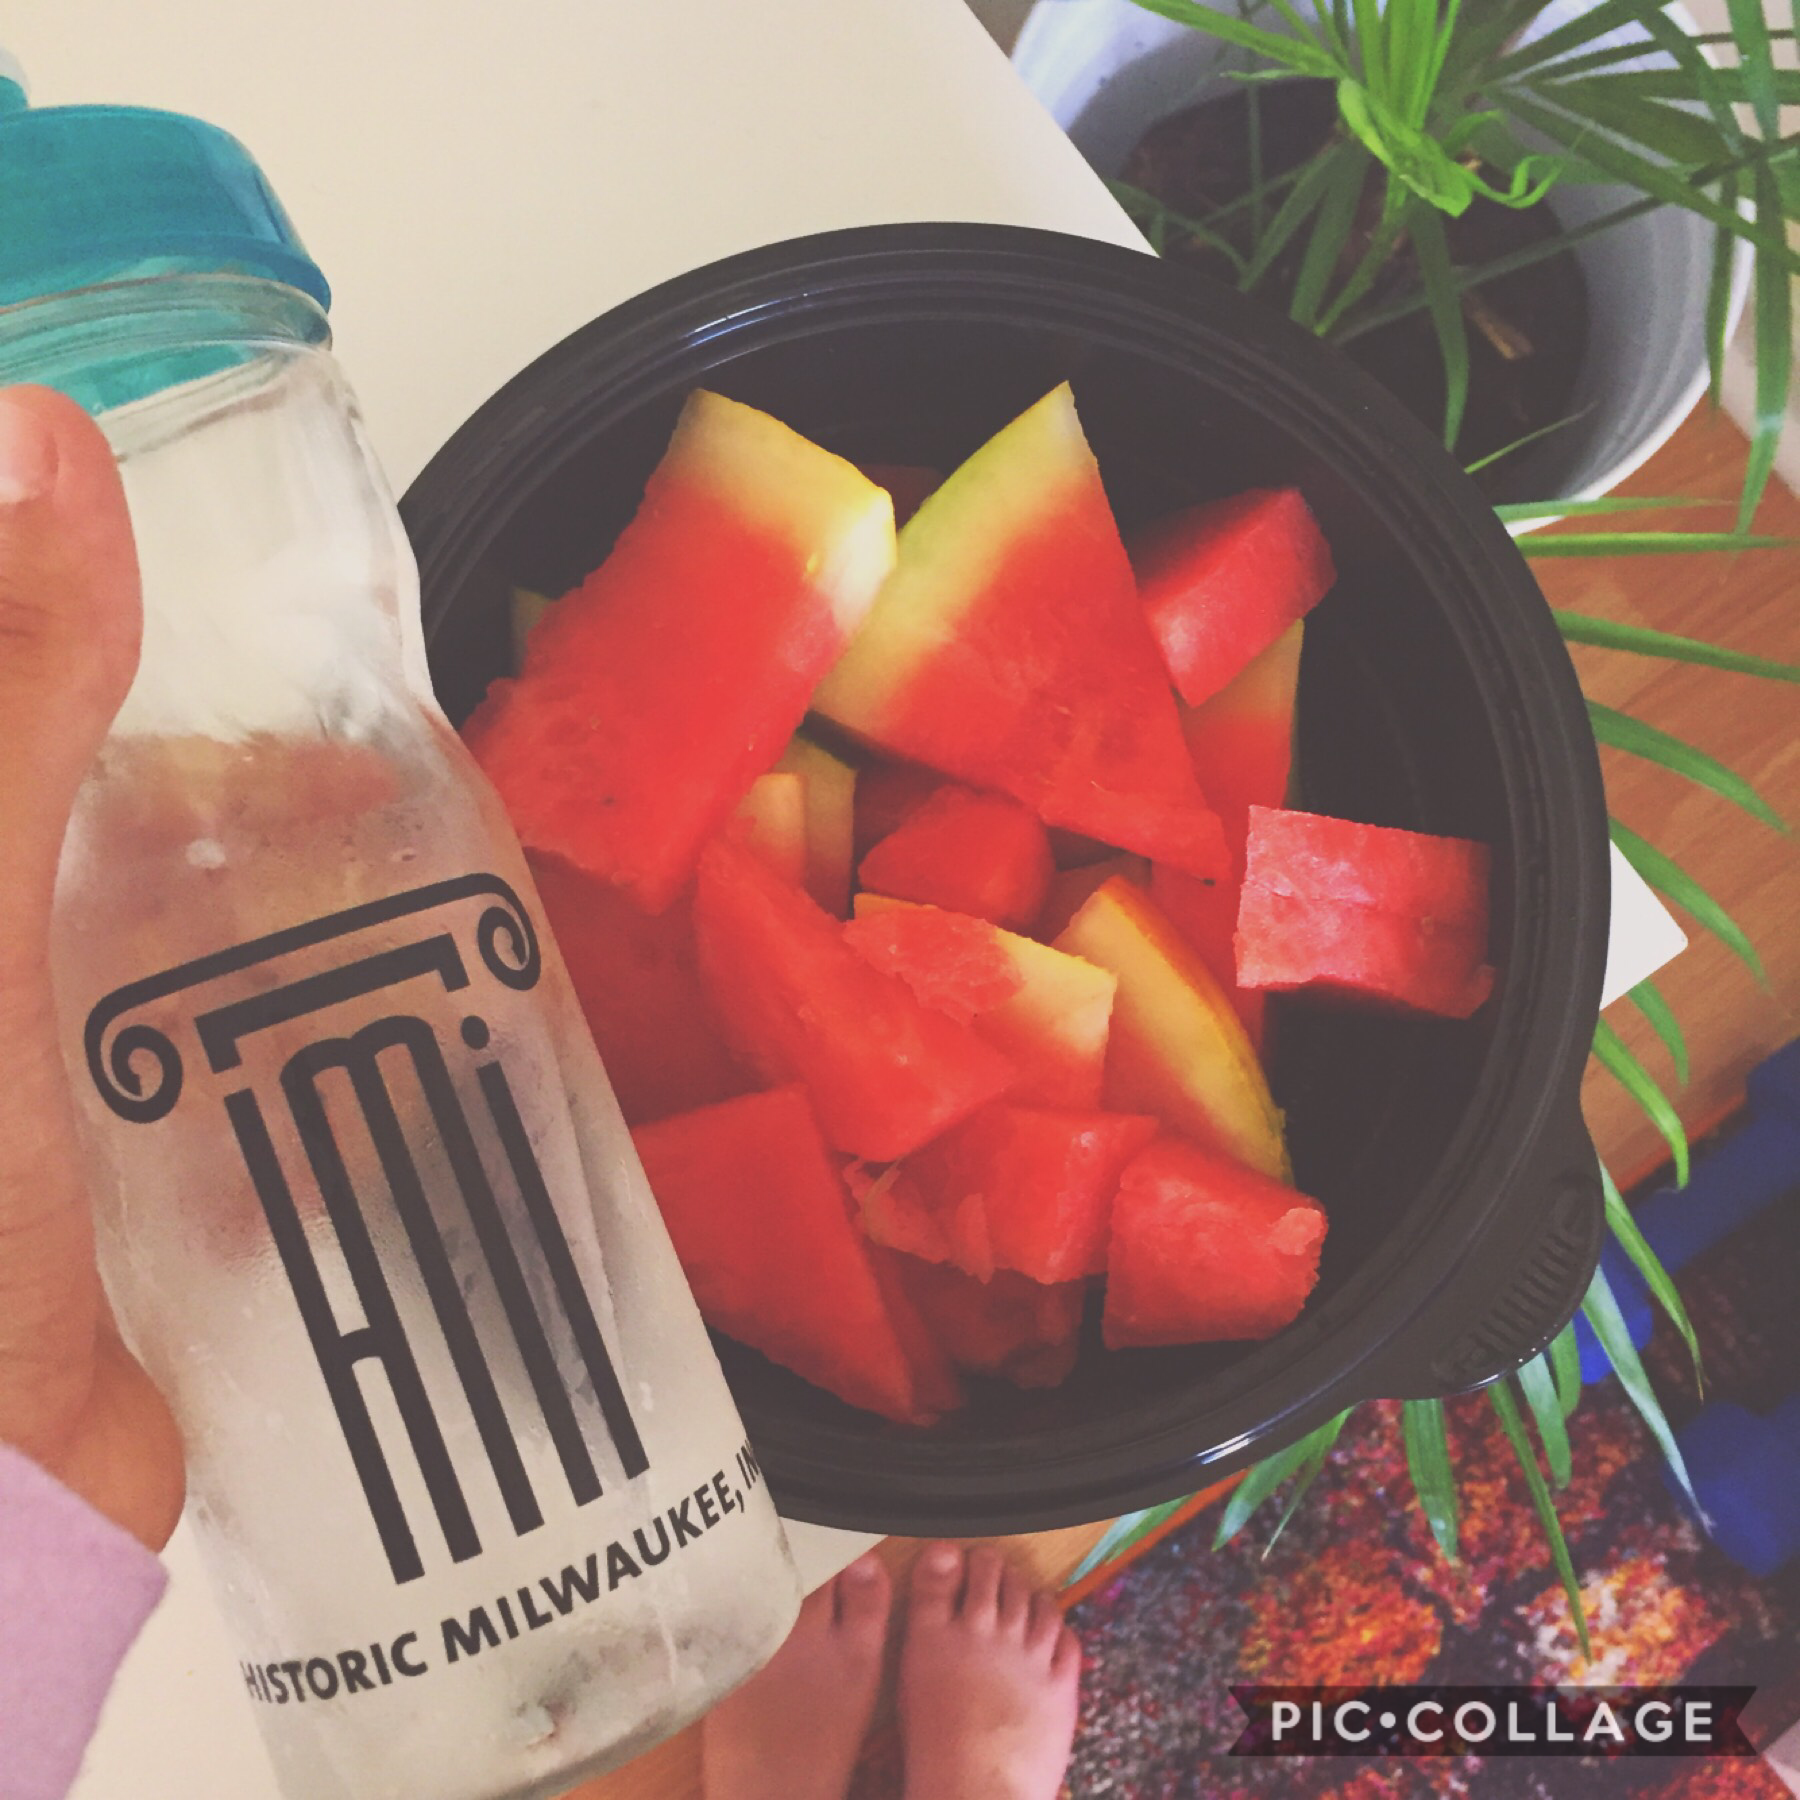 a splendid snack. i’ve been munching on this watermelon all day it’s bomb a*. lol but i’m gonna do some more veganism and weight loss talking in the remixes so if u want check it out soon!!! <3 